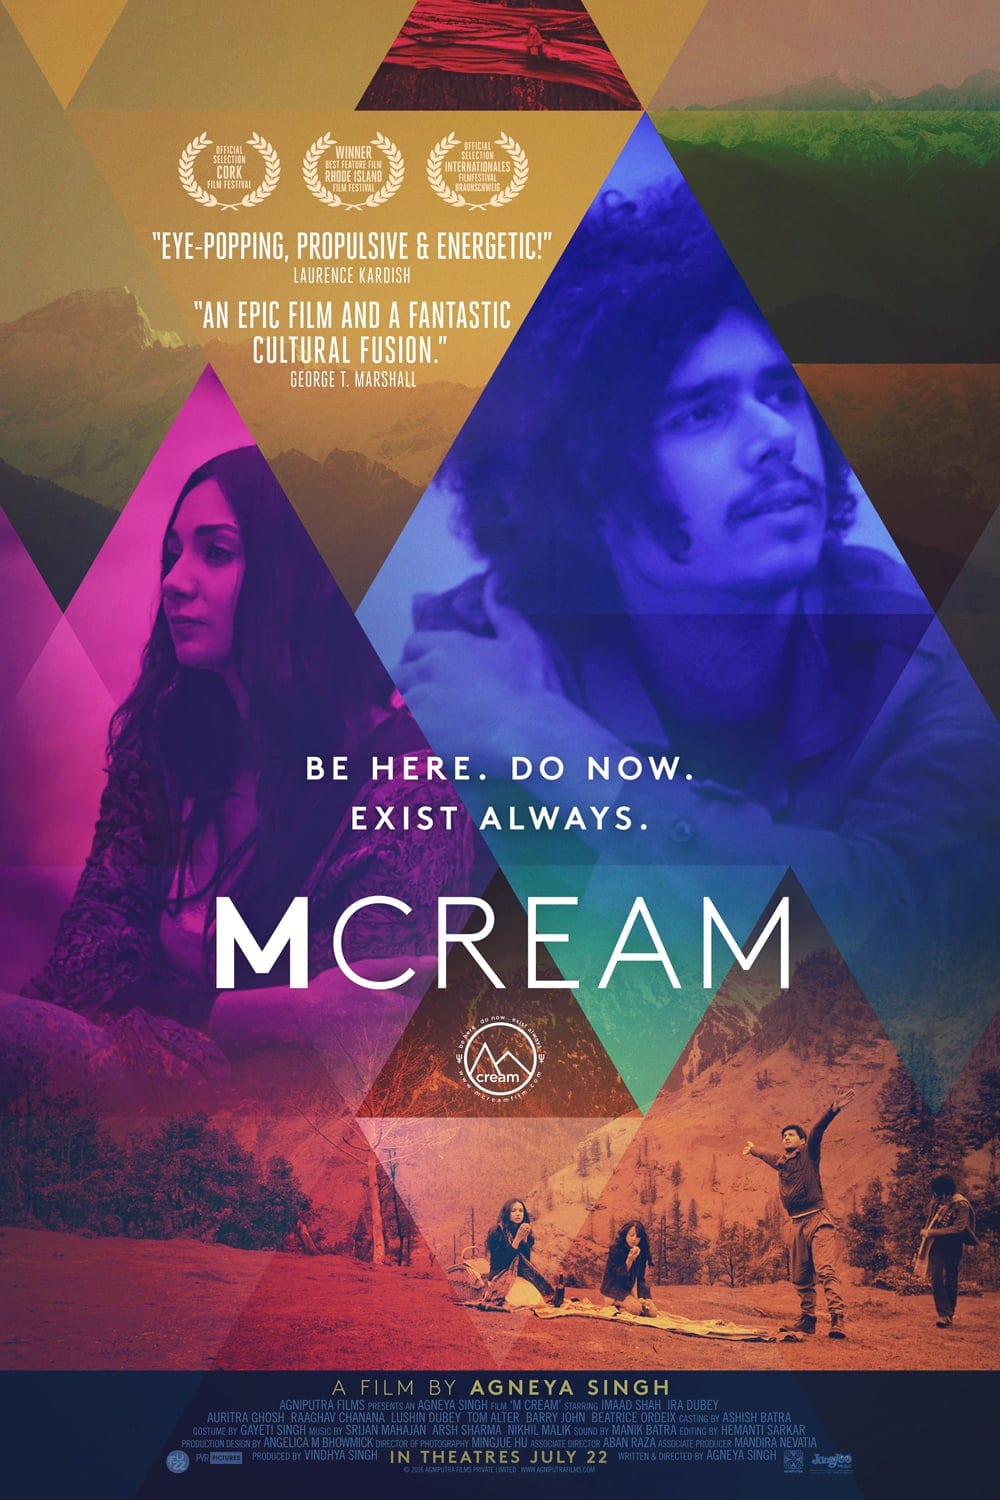 Poster for the movie "M Cream"